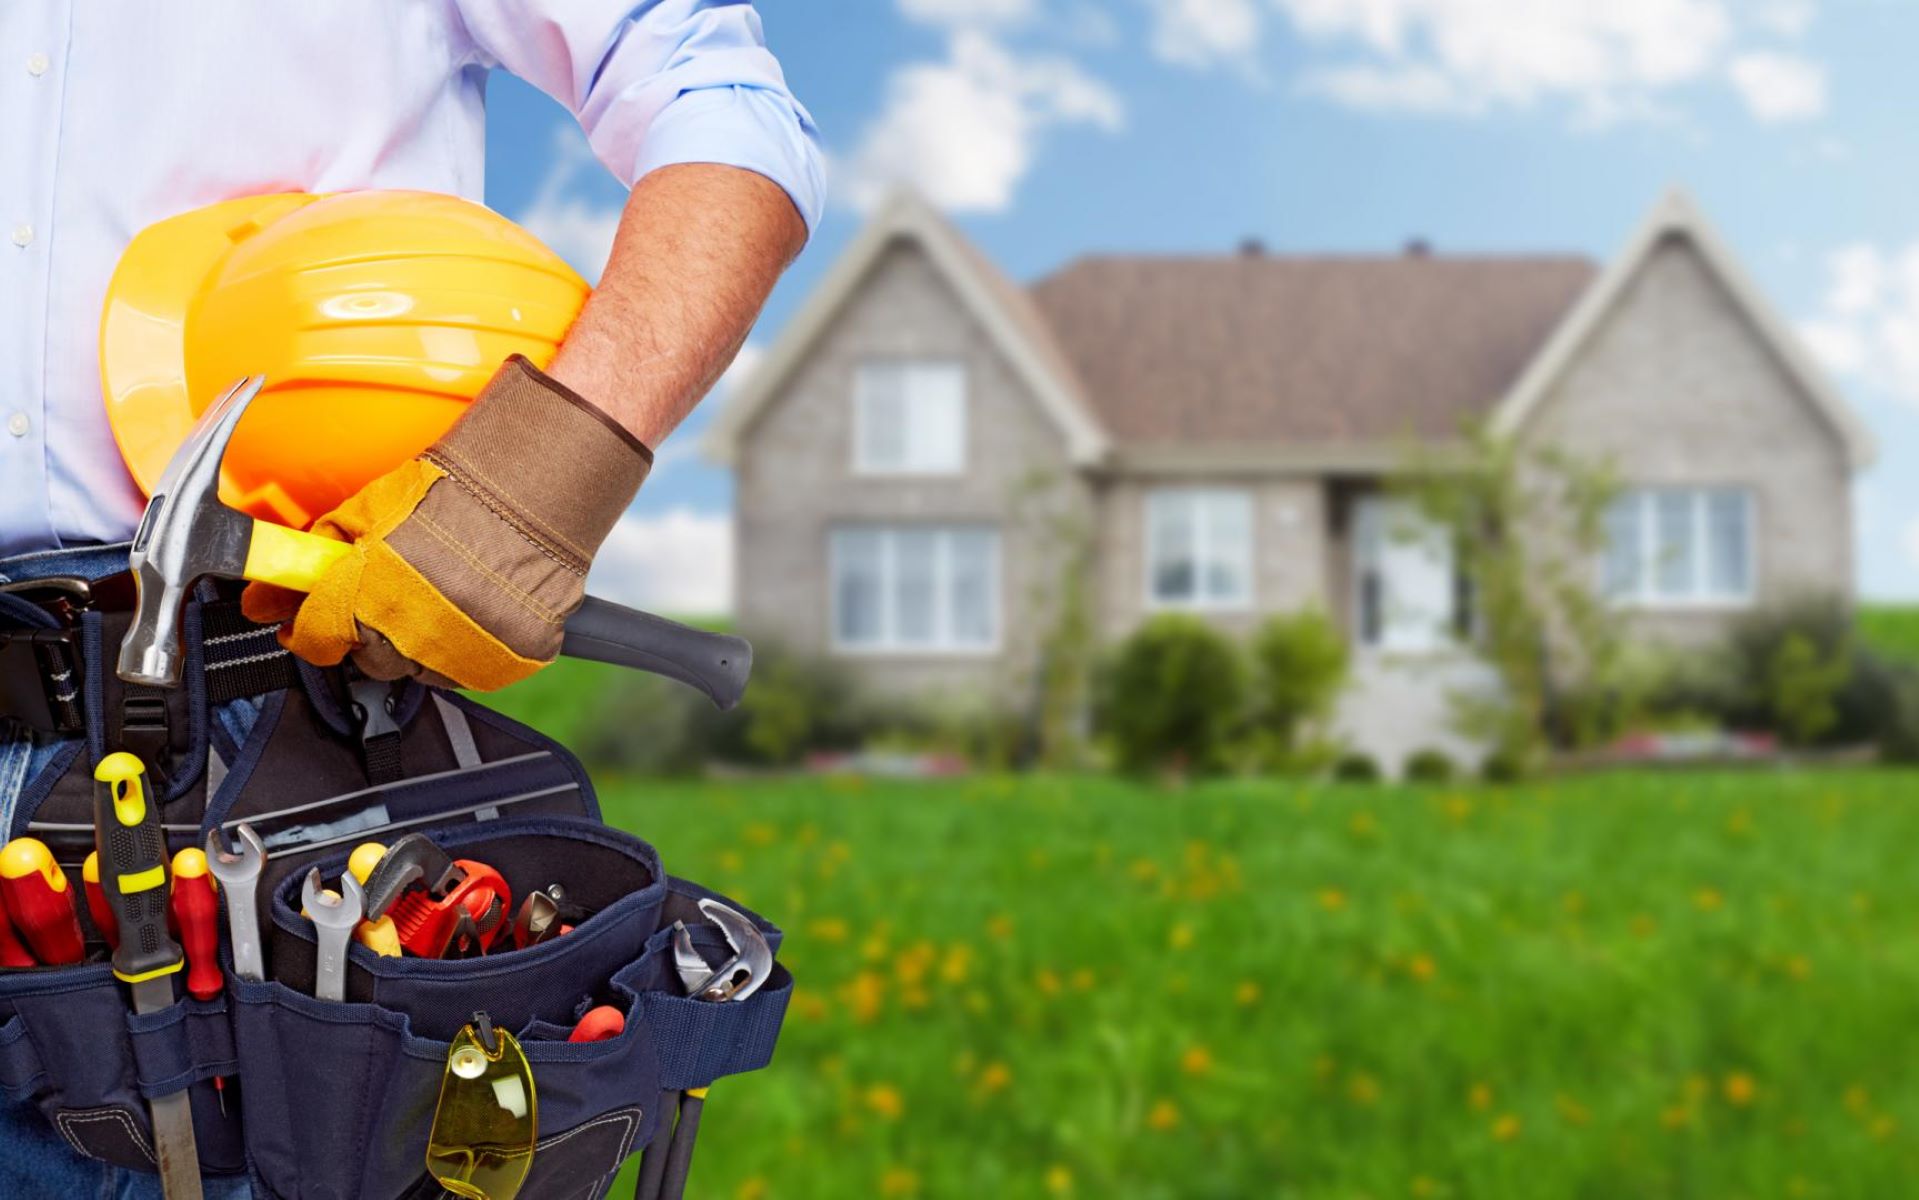 How Much Does Typical Home Maintenance Cost Per Year